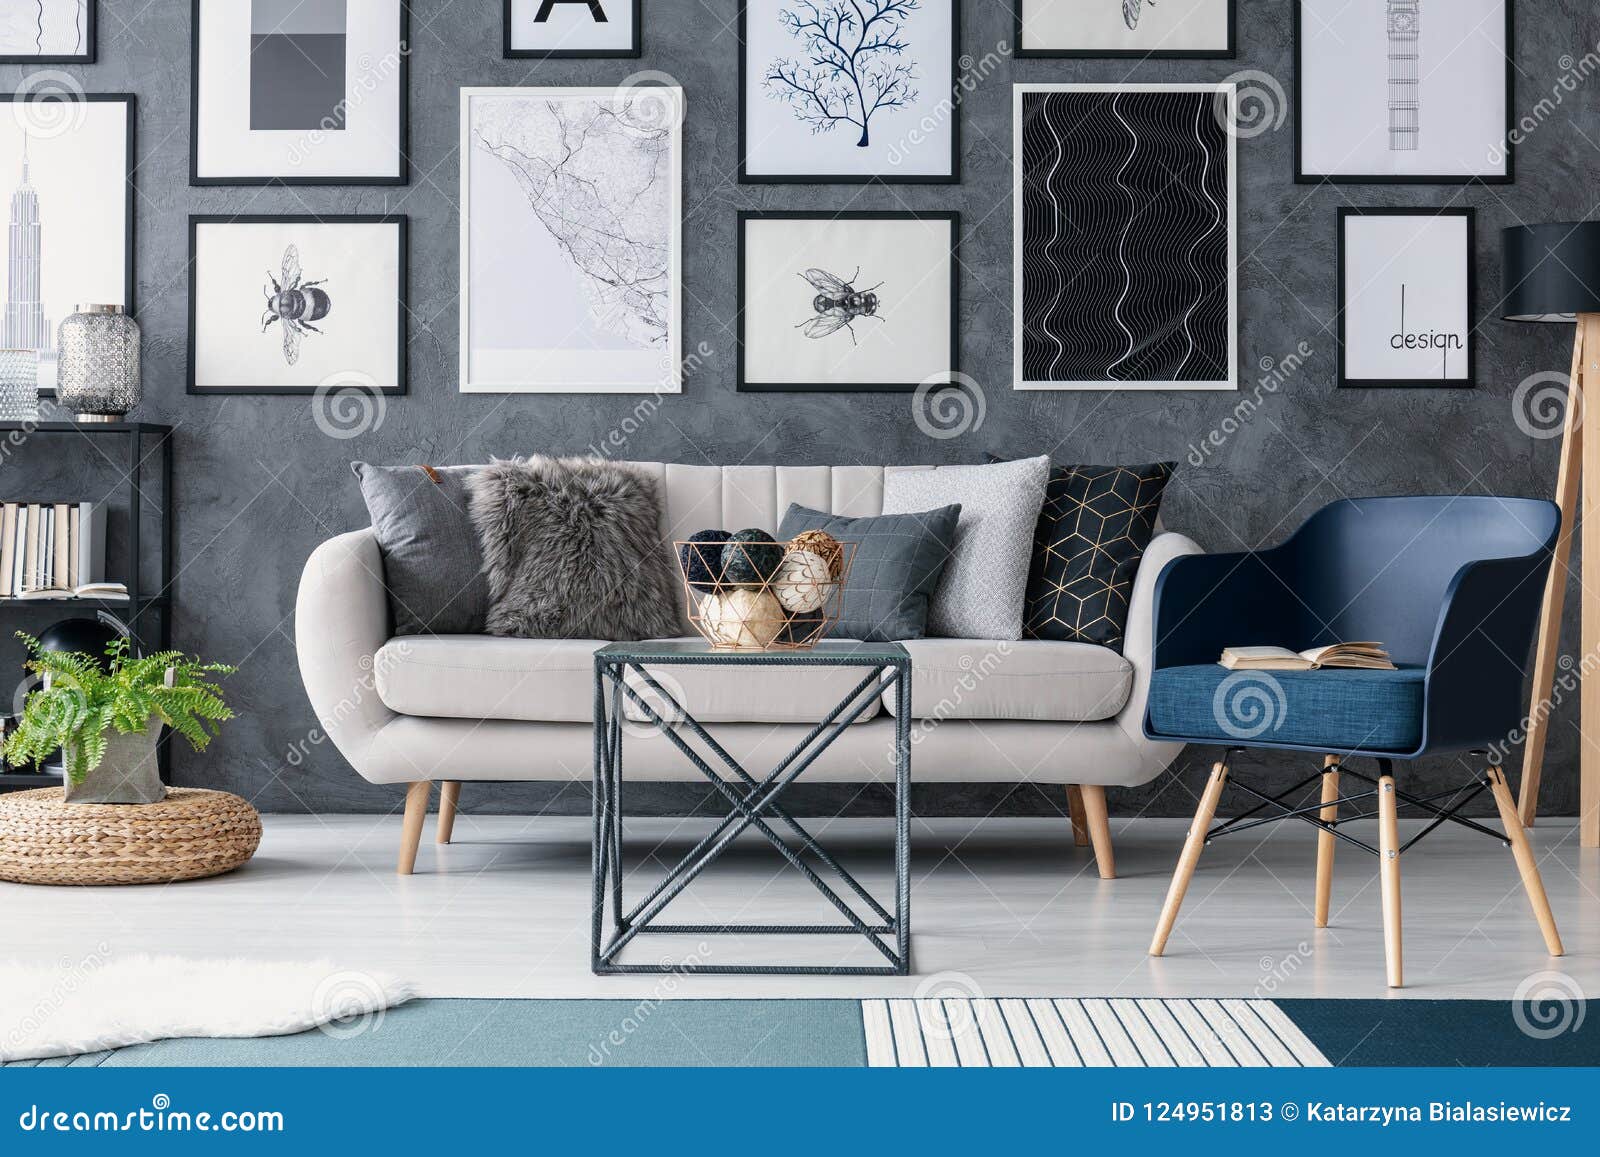 blue armchair next to sofa and table in living room interior with posters and plant on pouf. real photo